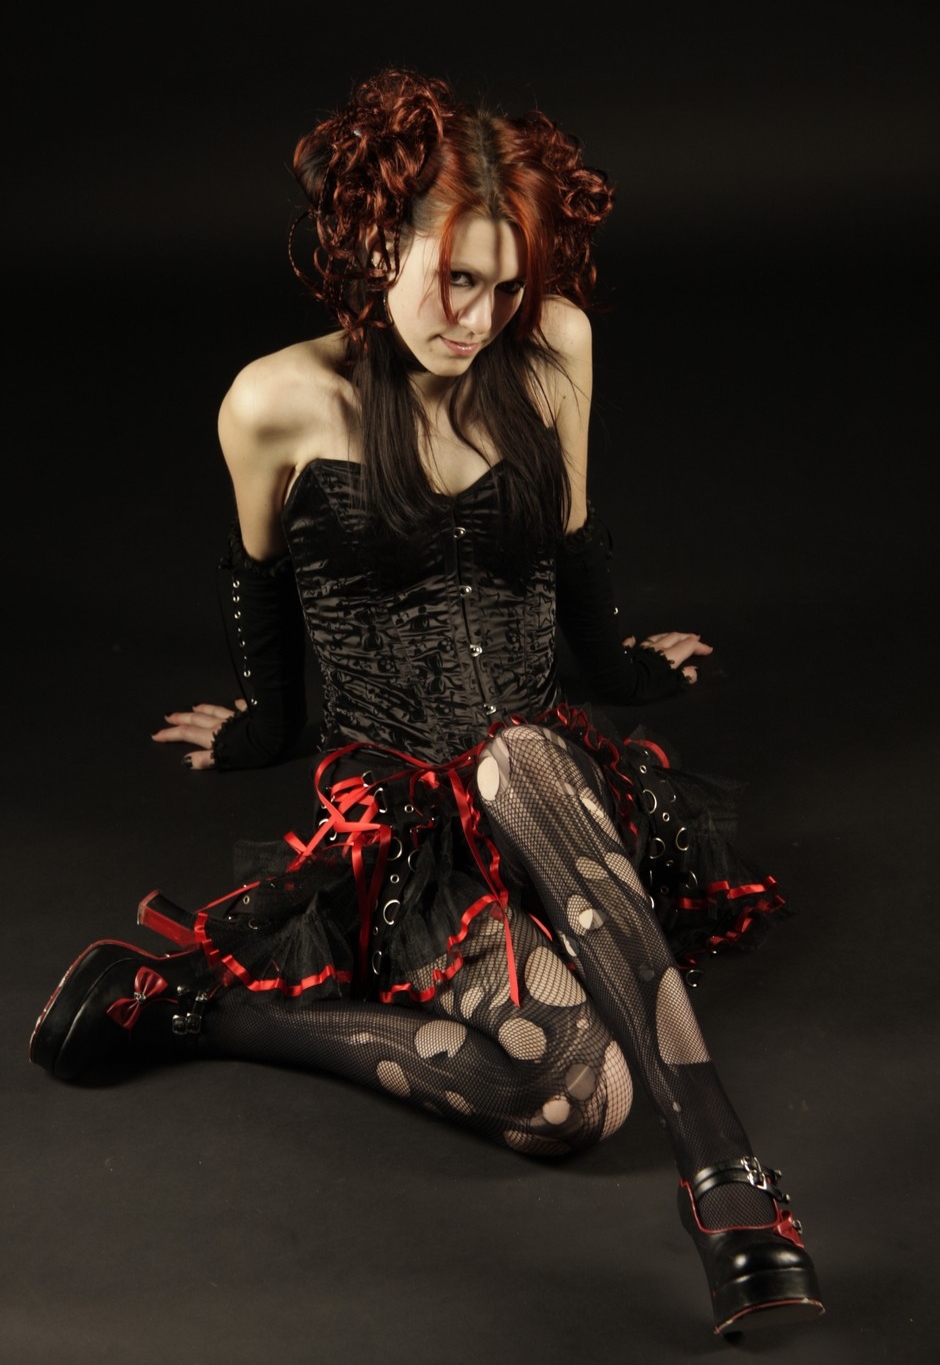 Redhead Gothic Girl wearing Black Sheer Ripped Pantyhose on Black Fishnet Tights